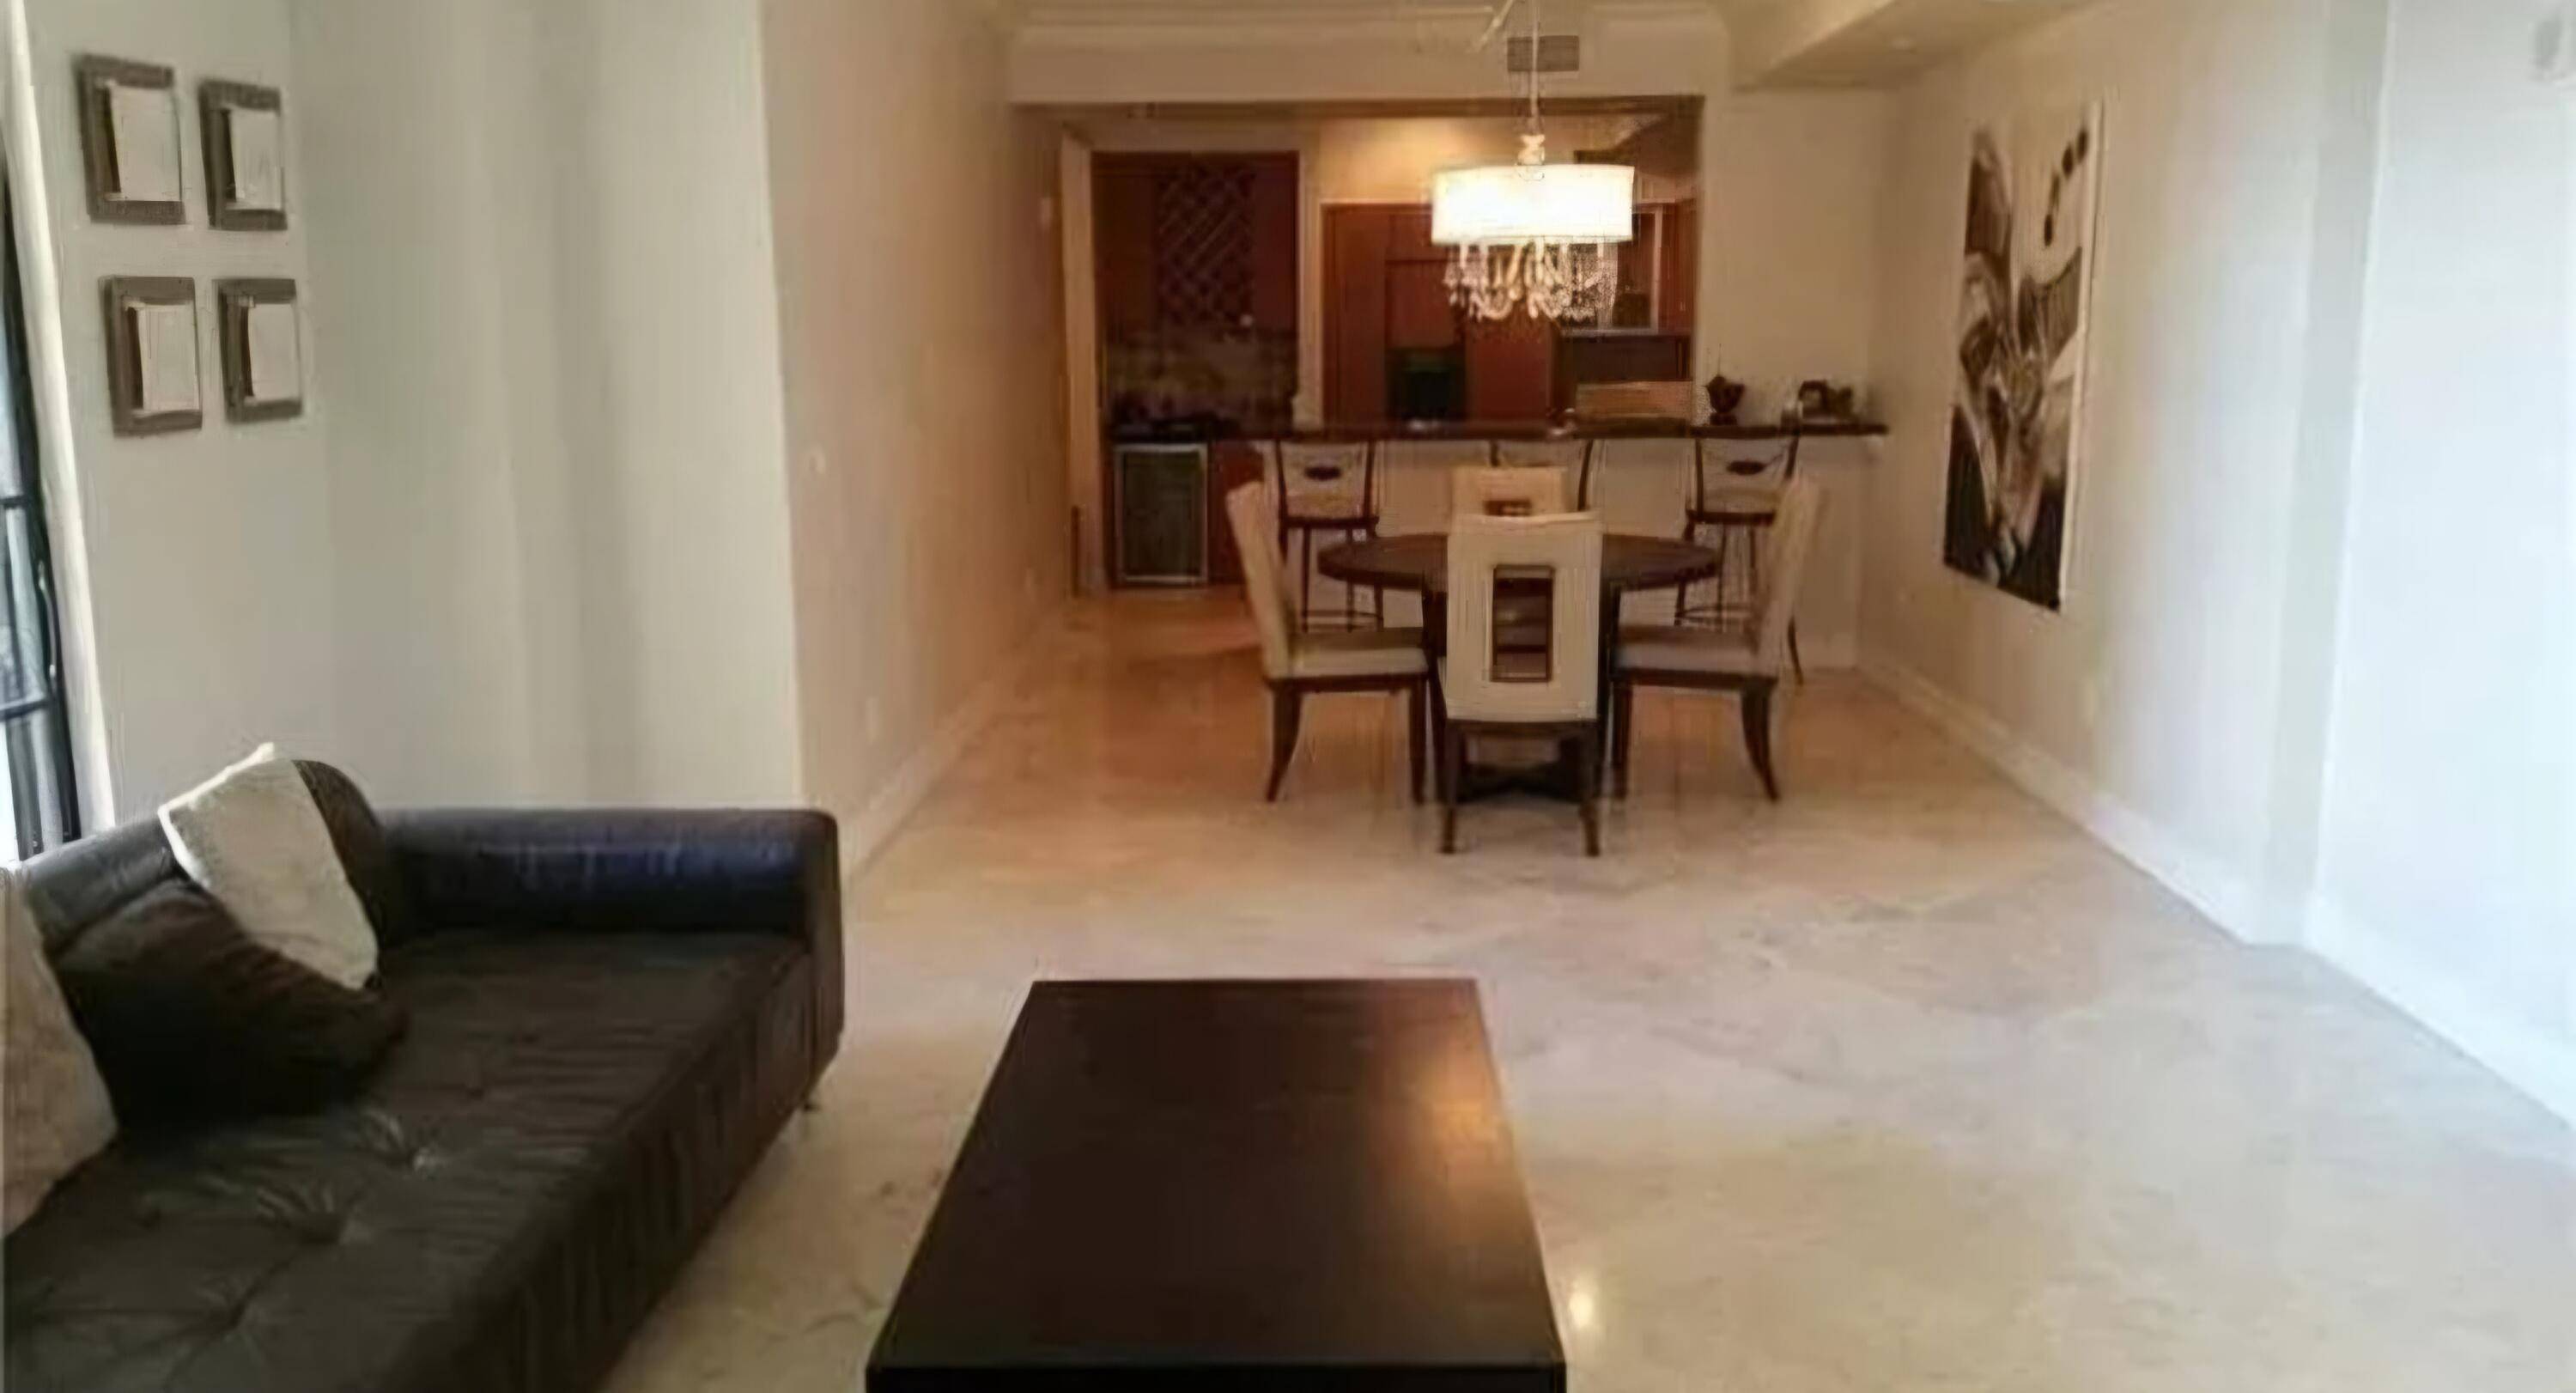 BEAUTIFUL THREE BEDROOM CONDO IN THE HEART OF DOWNTOWN BOCA !